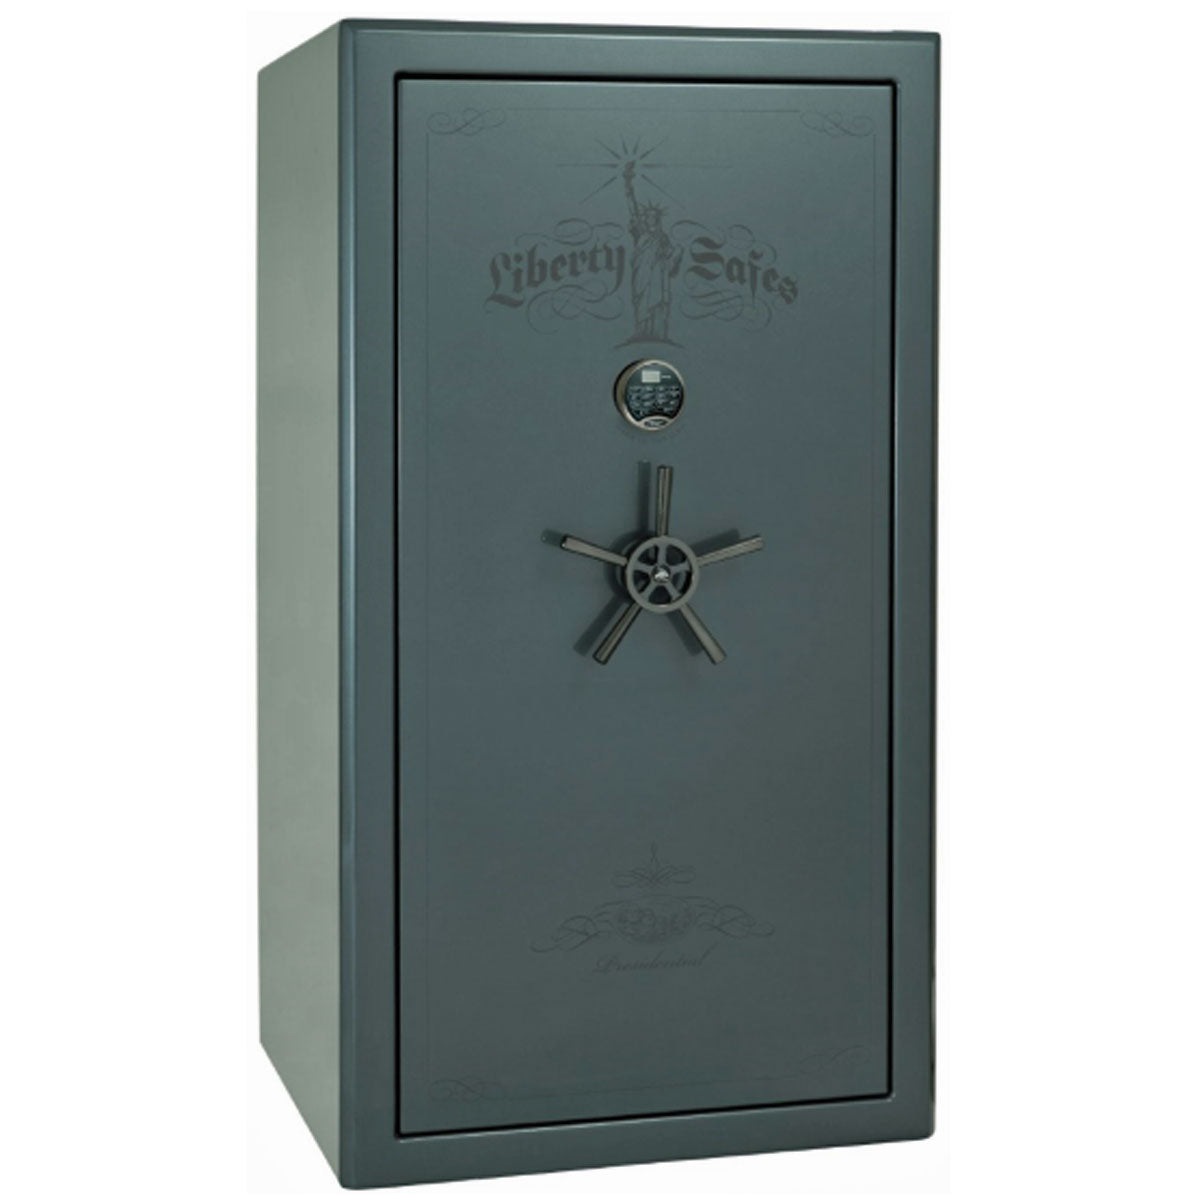 Liberty Safe Presidential 40 in Forest Mist Gloss with Black Chrome Electronic Lock, closed door.